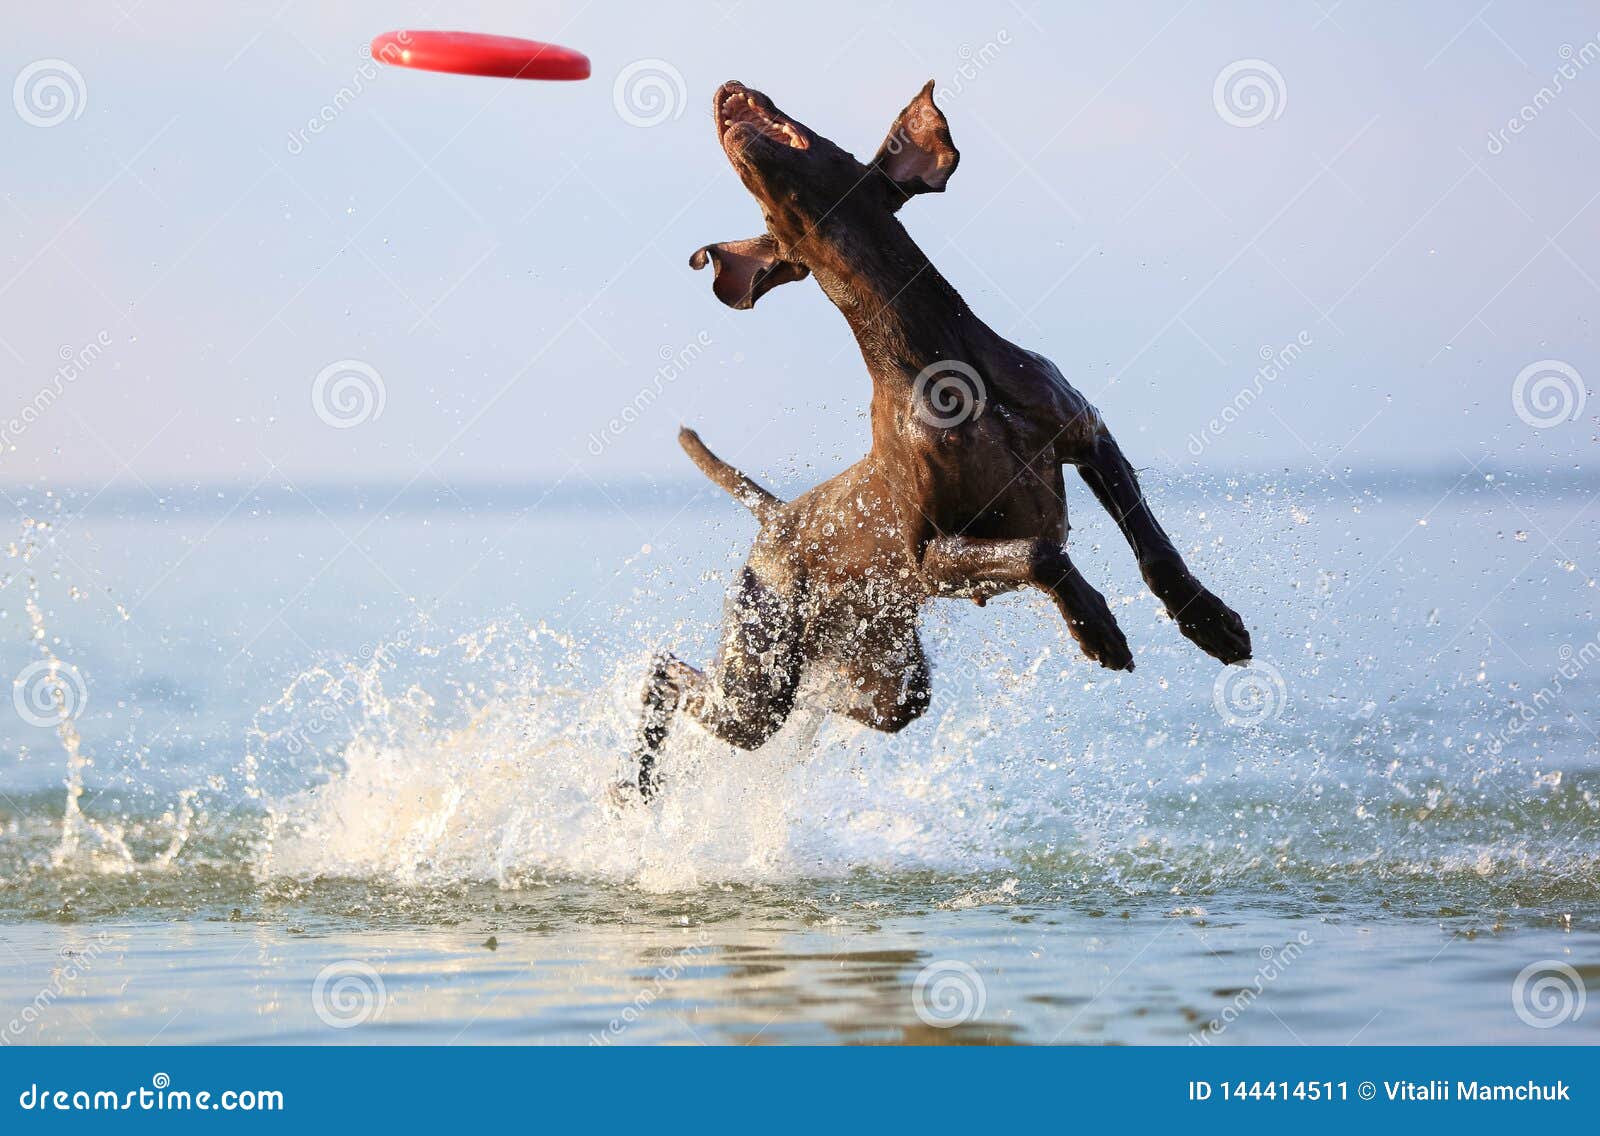 happy, playful brown dog german shorthaired pointer is running and jumping on the water making splashes and waves.